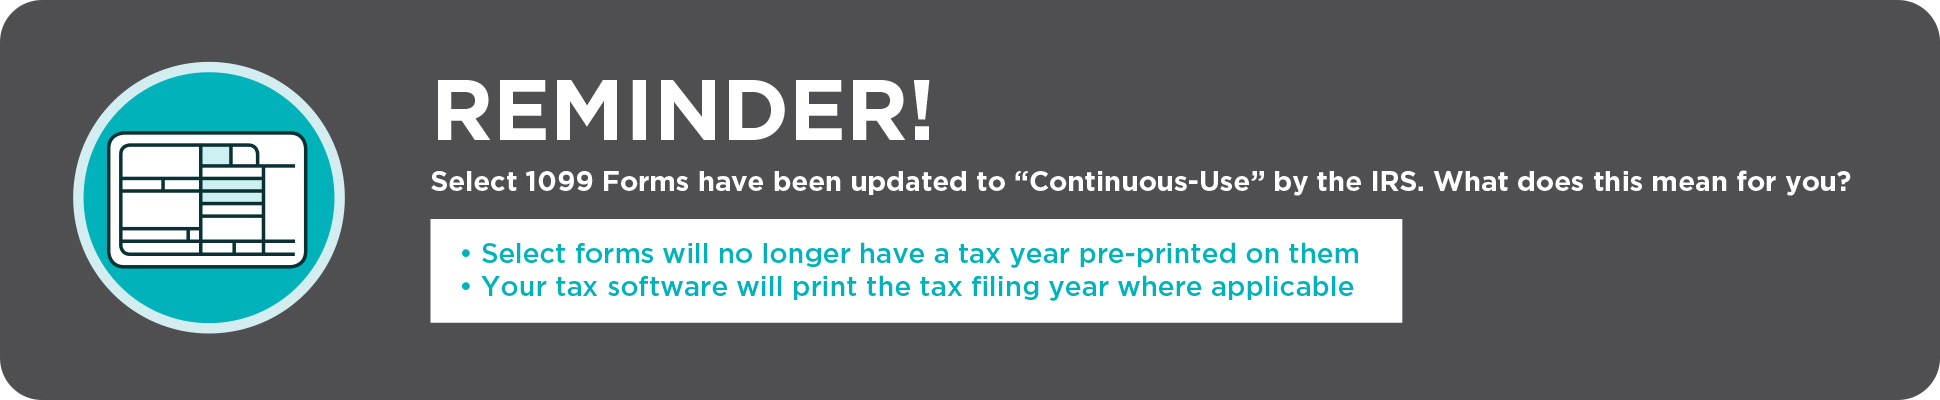 Reminder - Select 1099s are now "Continuous-Use" . Your tax software will print the tax filing year.